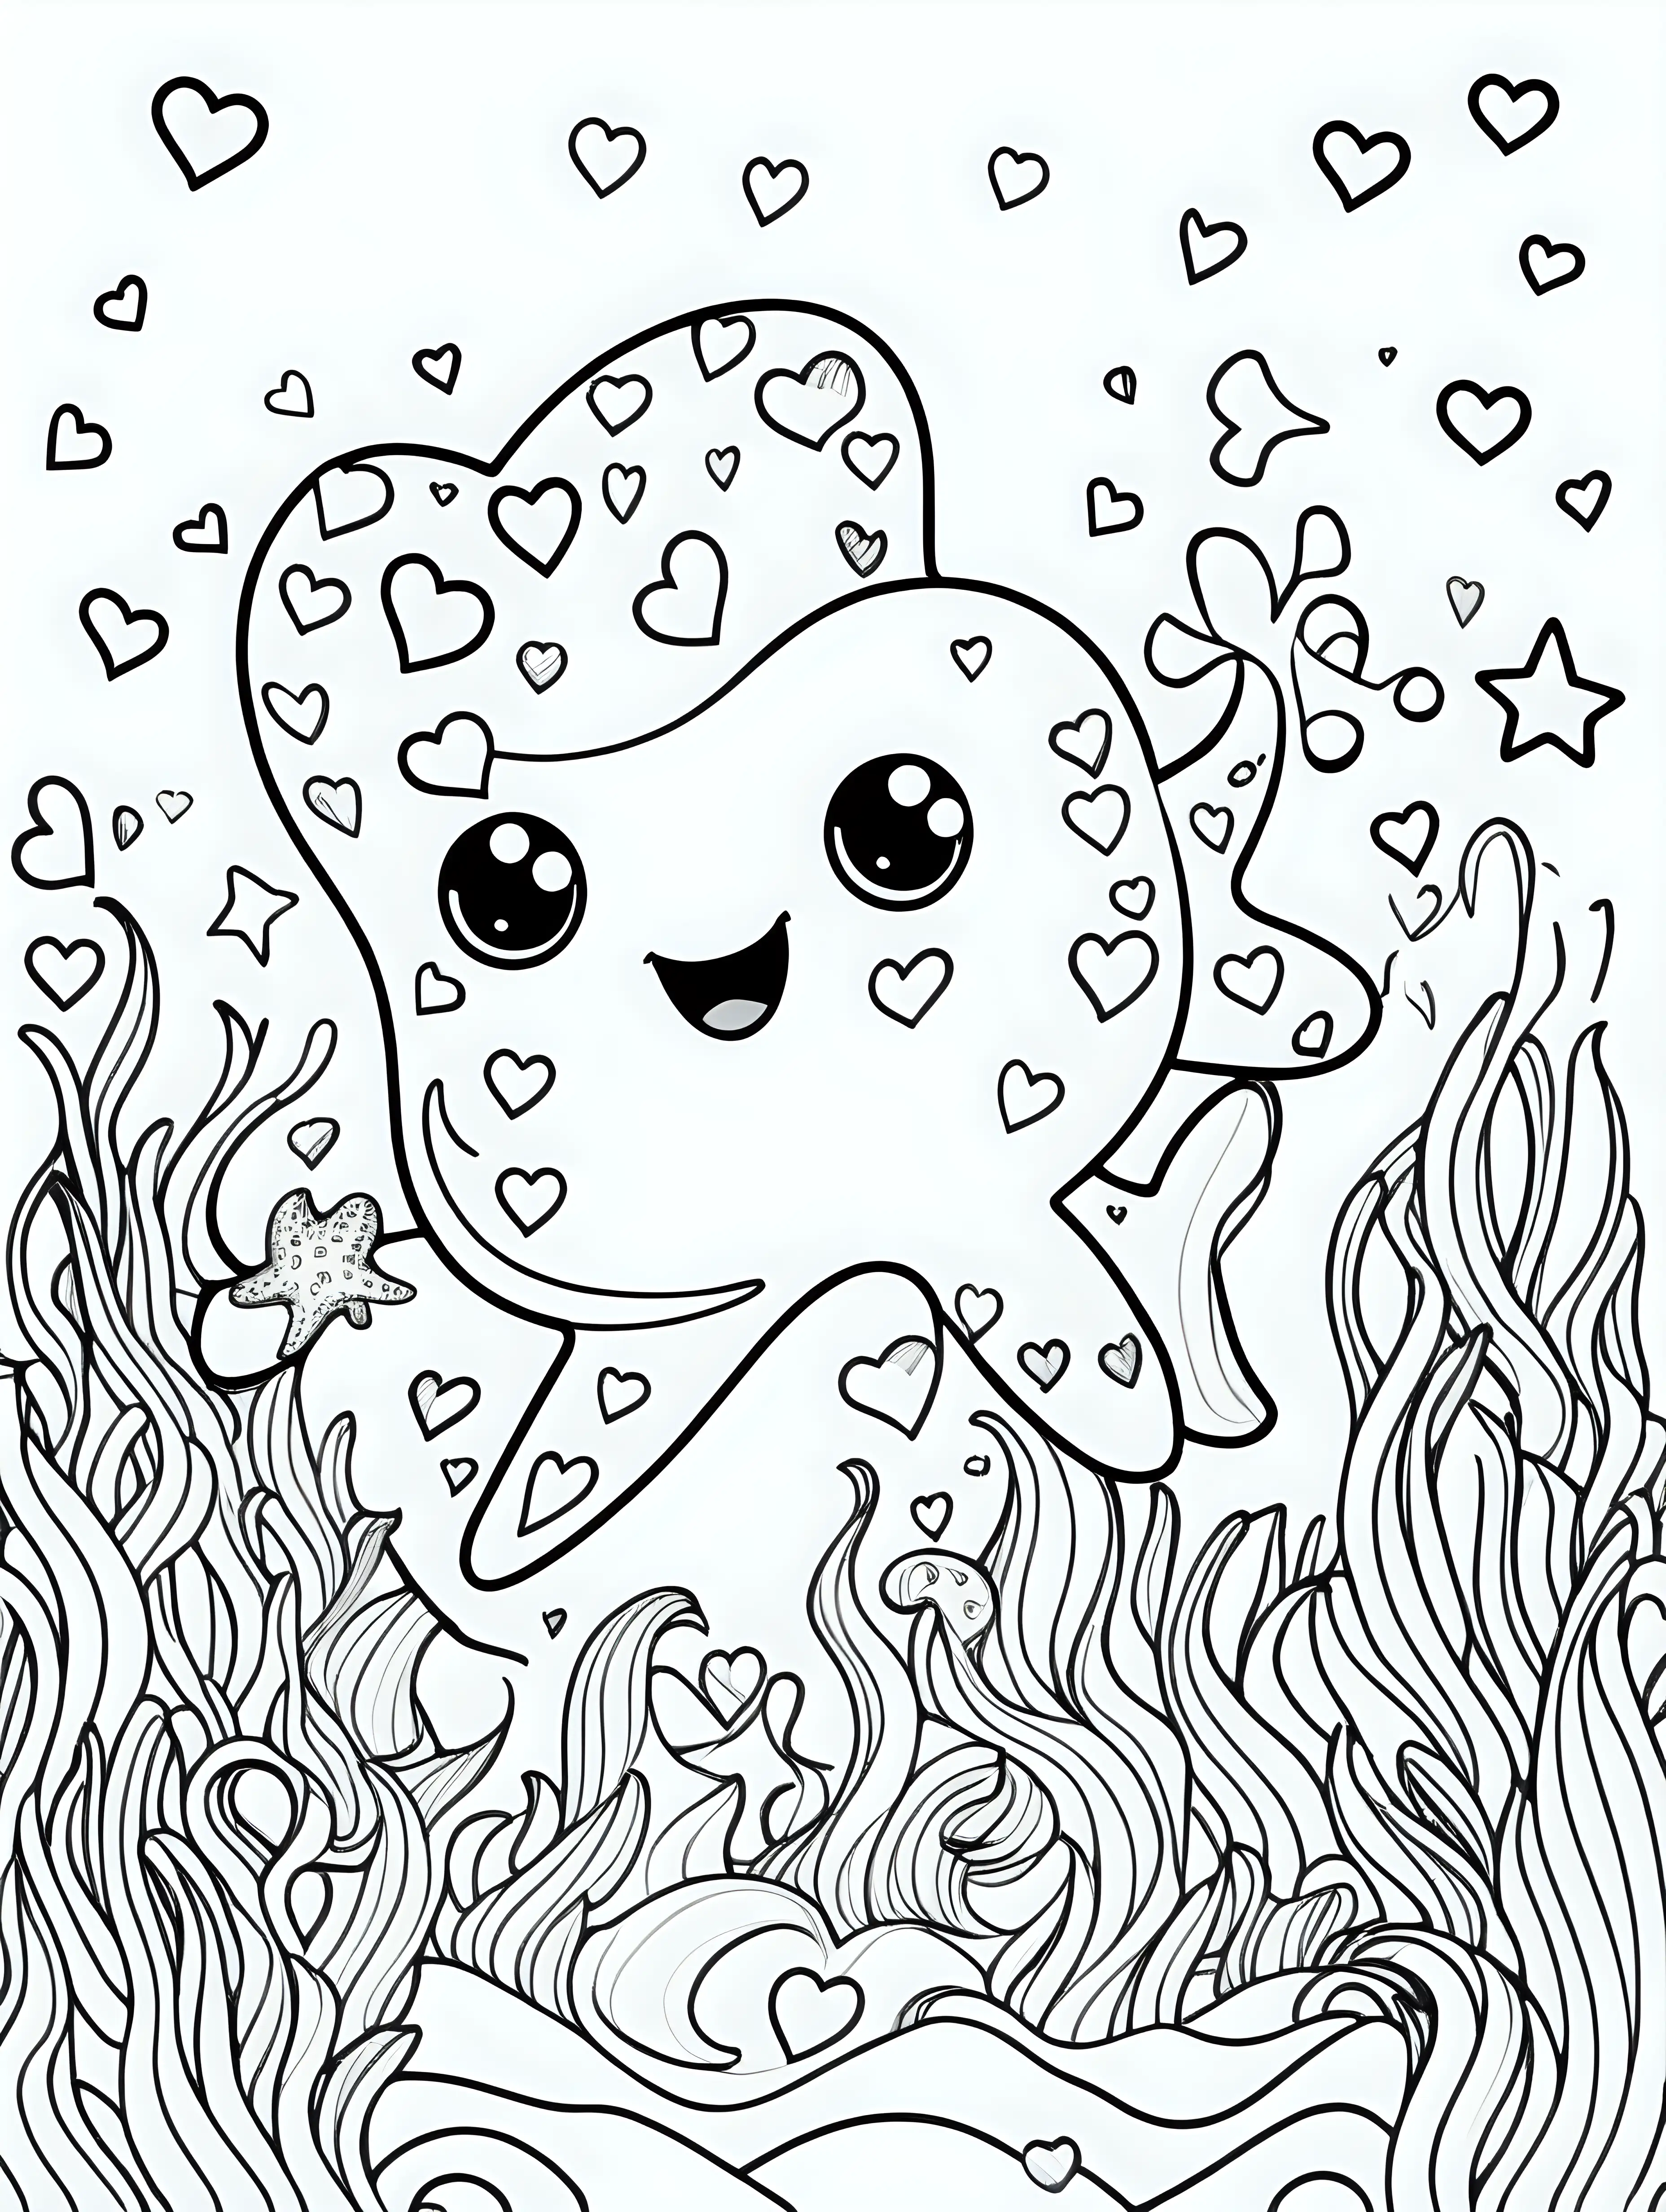 Cute Starfish Coloring Page Adorable Ocean Scene with Hearts